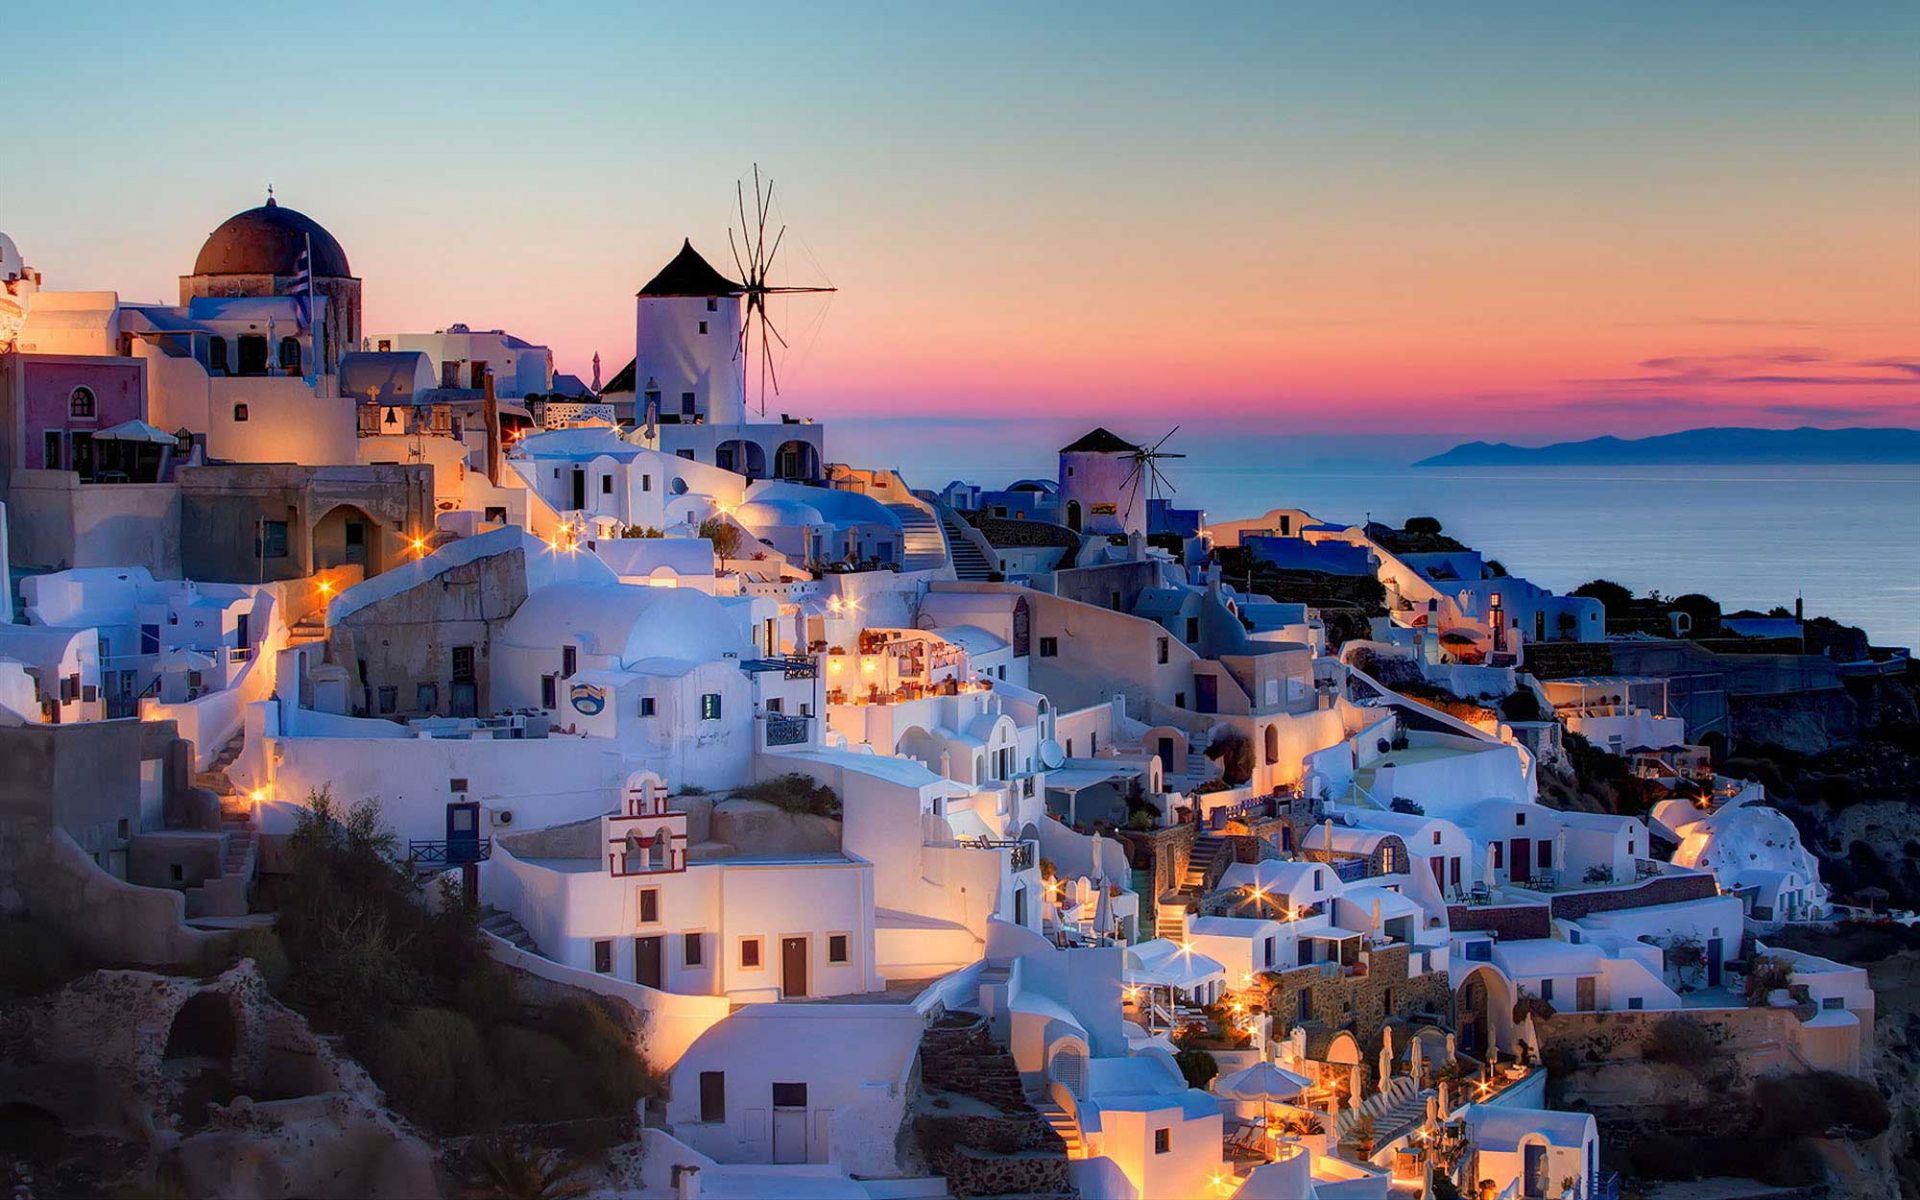 a colored image of Bodrum and white bodrum houses and windmill at the top during a sunset